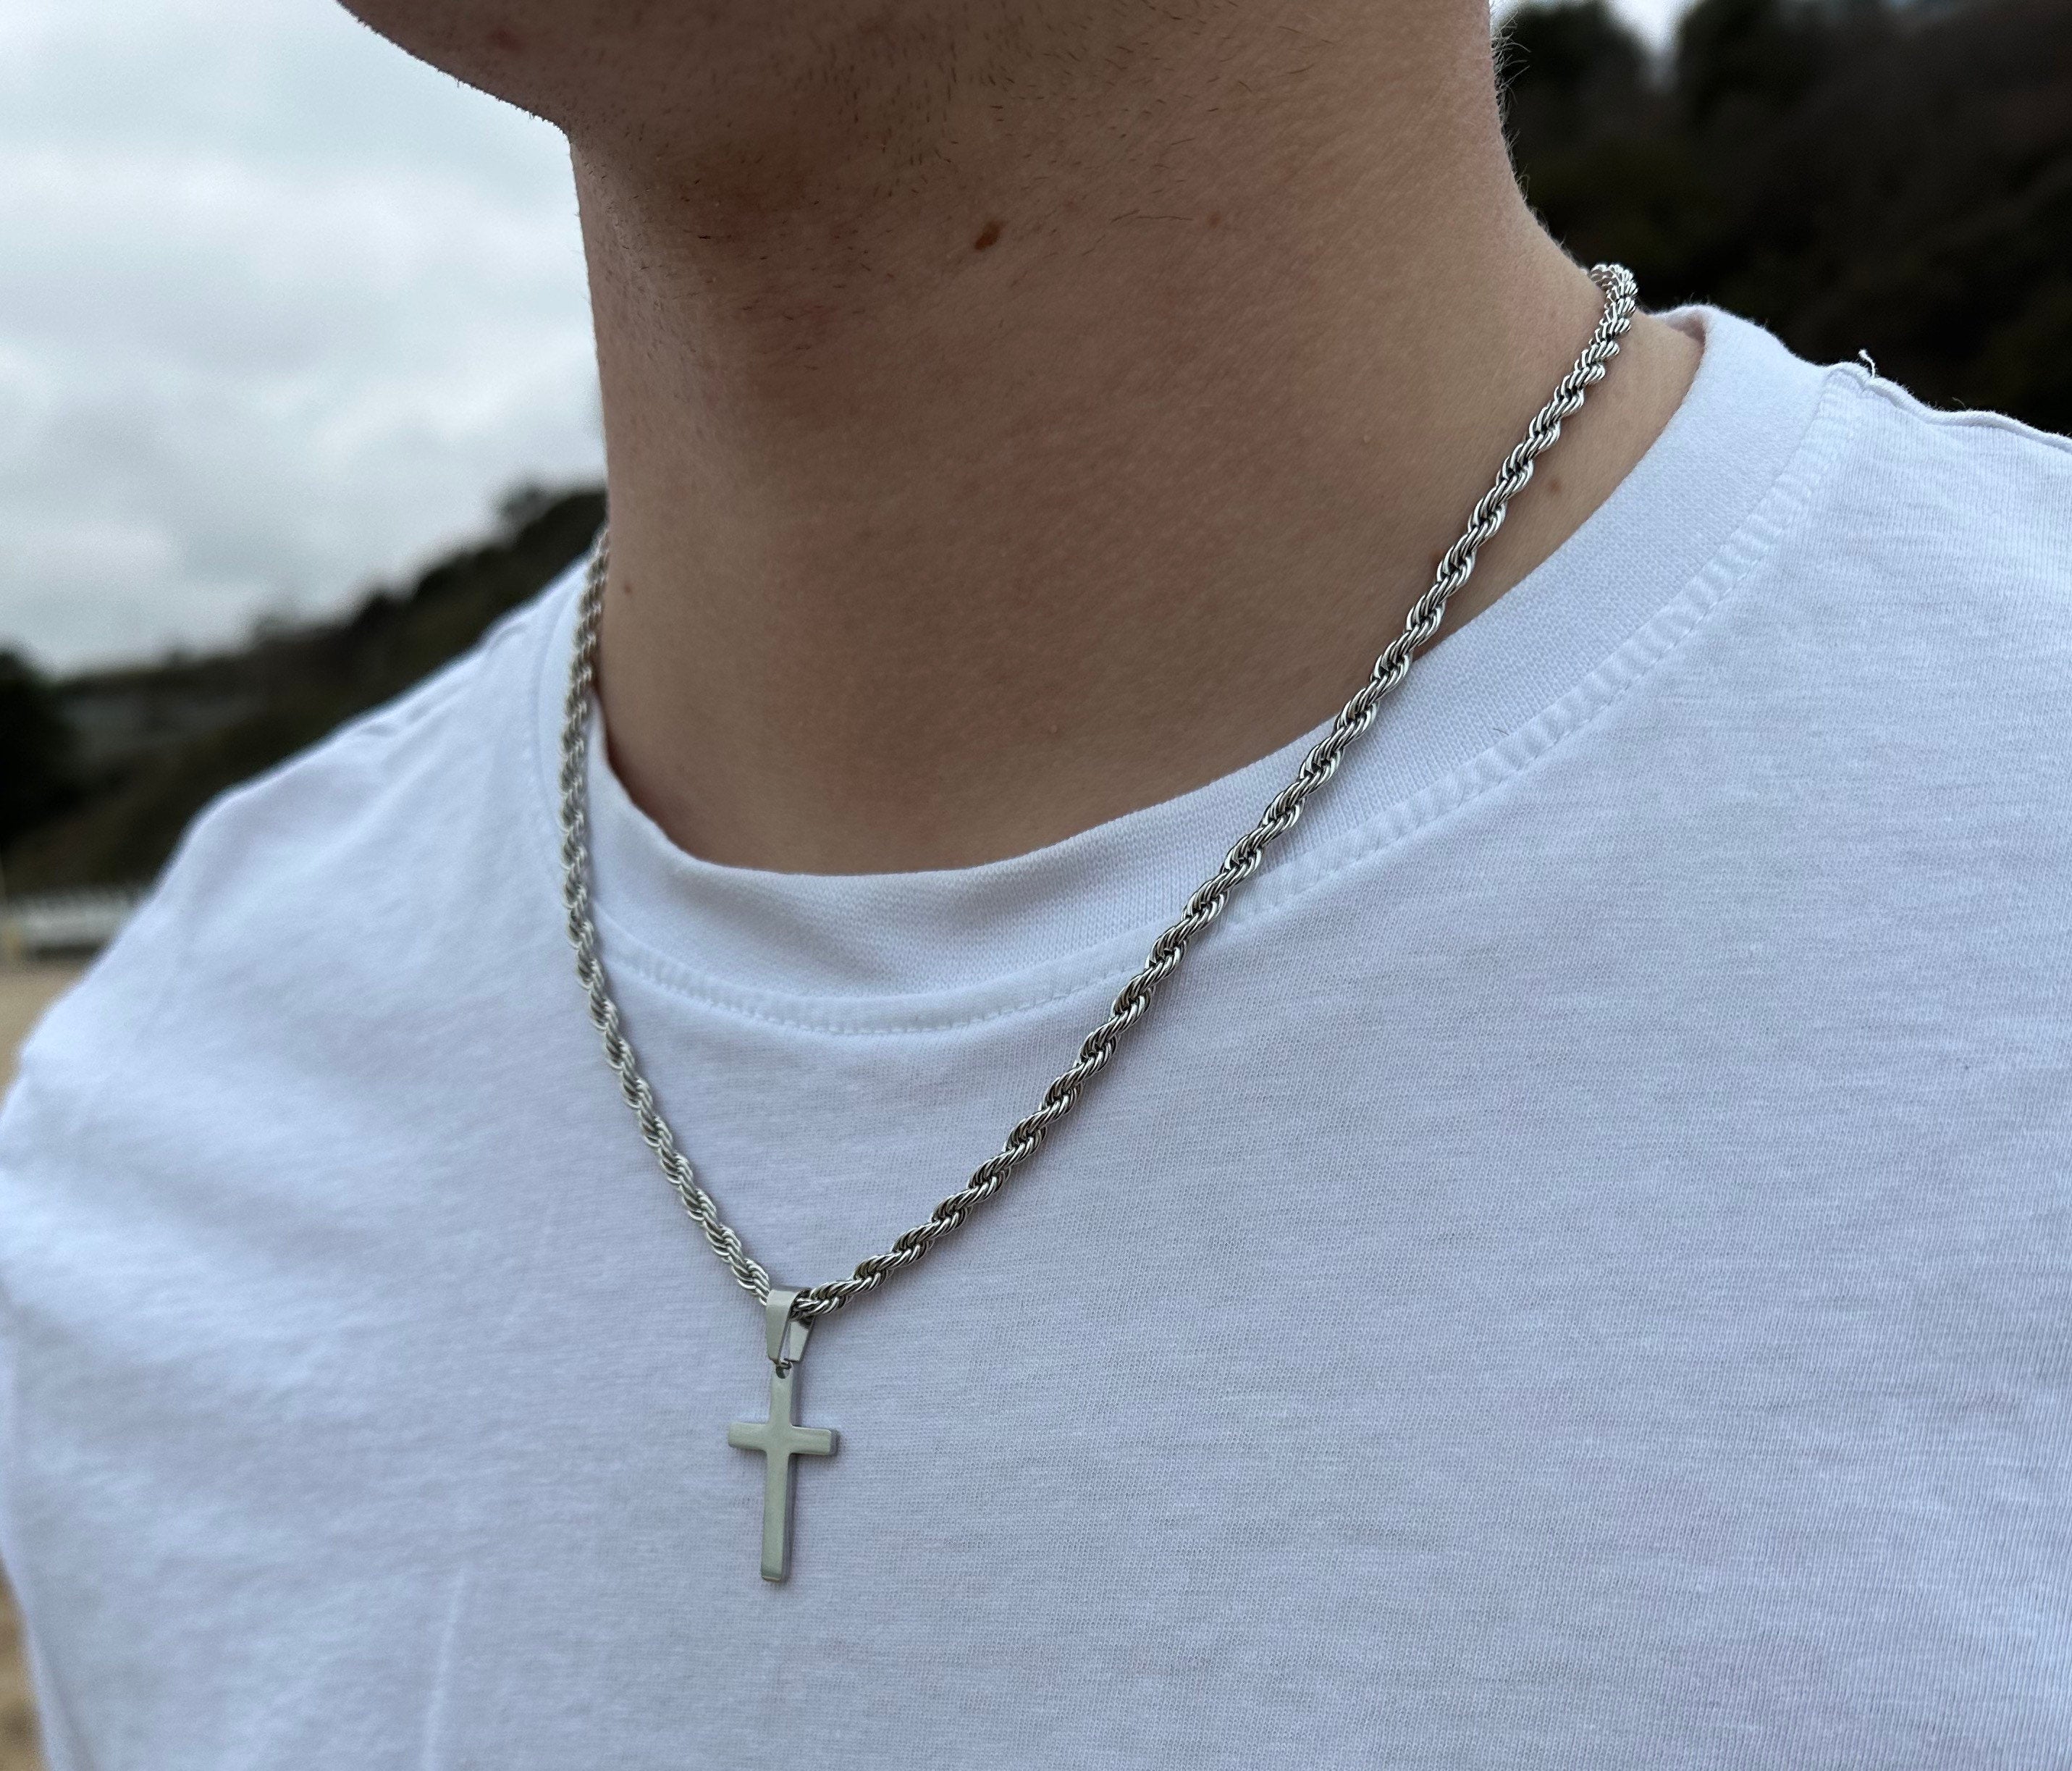 Cross Necklace for Men Layered Gold Black Silver Mens Cross Necklaces  Stainless Steel Cross Pendant Cuban Rope Necklace Jewelry Gifts Cross Chain  Necklace for Men Boys, Stainless Steel, No Gemstone : Amazon.co.uk: